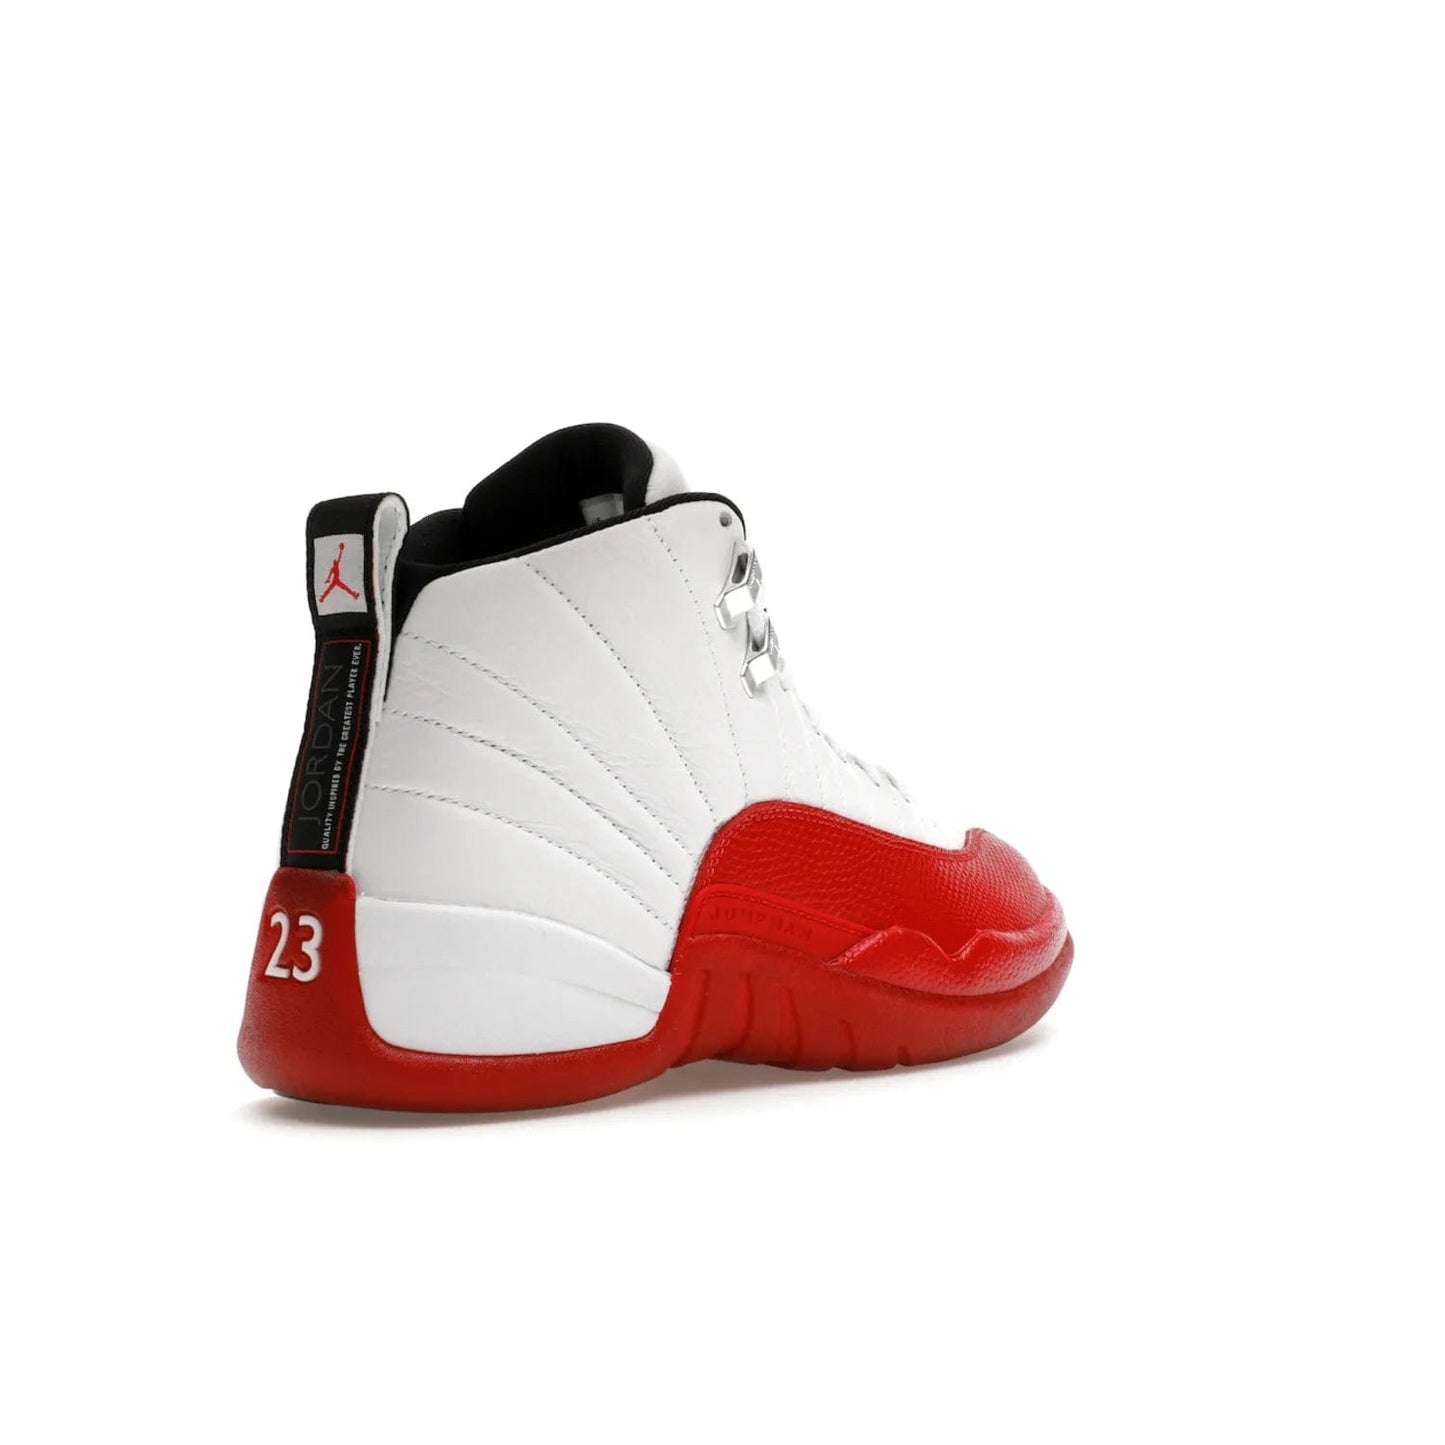 Jordan 12 Retro Cherry (2023) - Image 32 - Only at www.BallersClubKickz.com - Live your sneaker legend with the Jordan 12 Retro Cherry. Iconic pebbled leather mudguards, quilted uppers, and varsity red accents make this 1997 classic a must-have for 2023. Shine on with silver hardware and matching midsoles, and bring it all together for limited-edition style on October 28th. Step into Jordan legacy with the Retro Cherry.